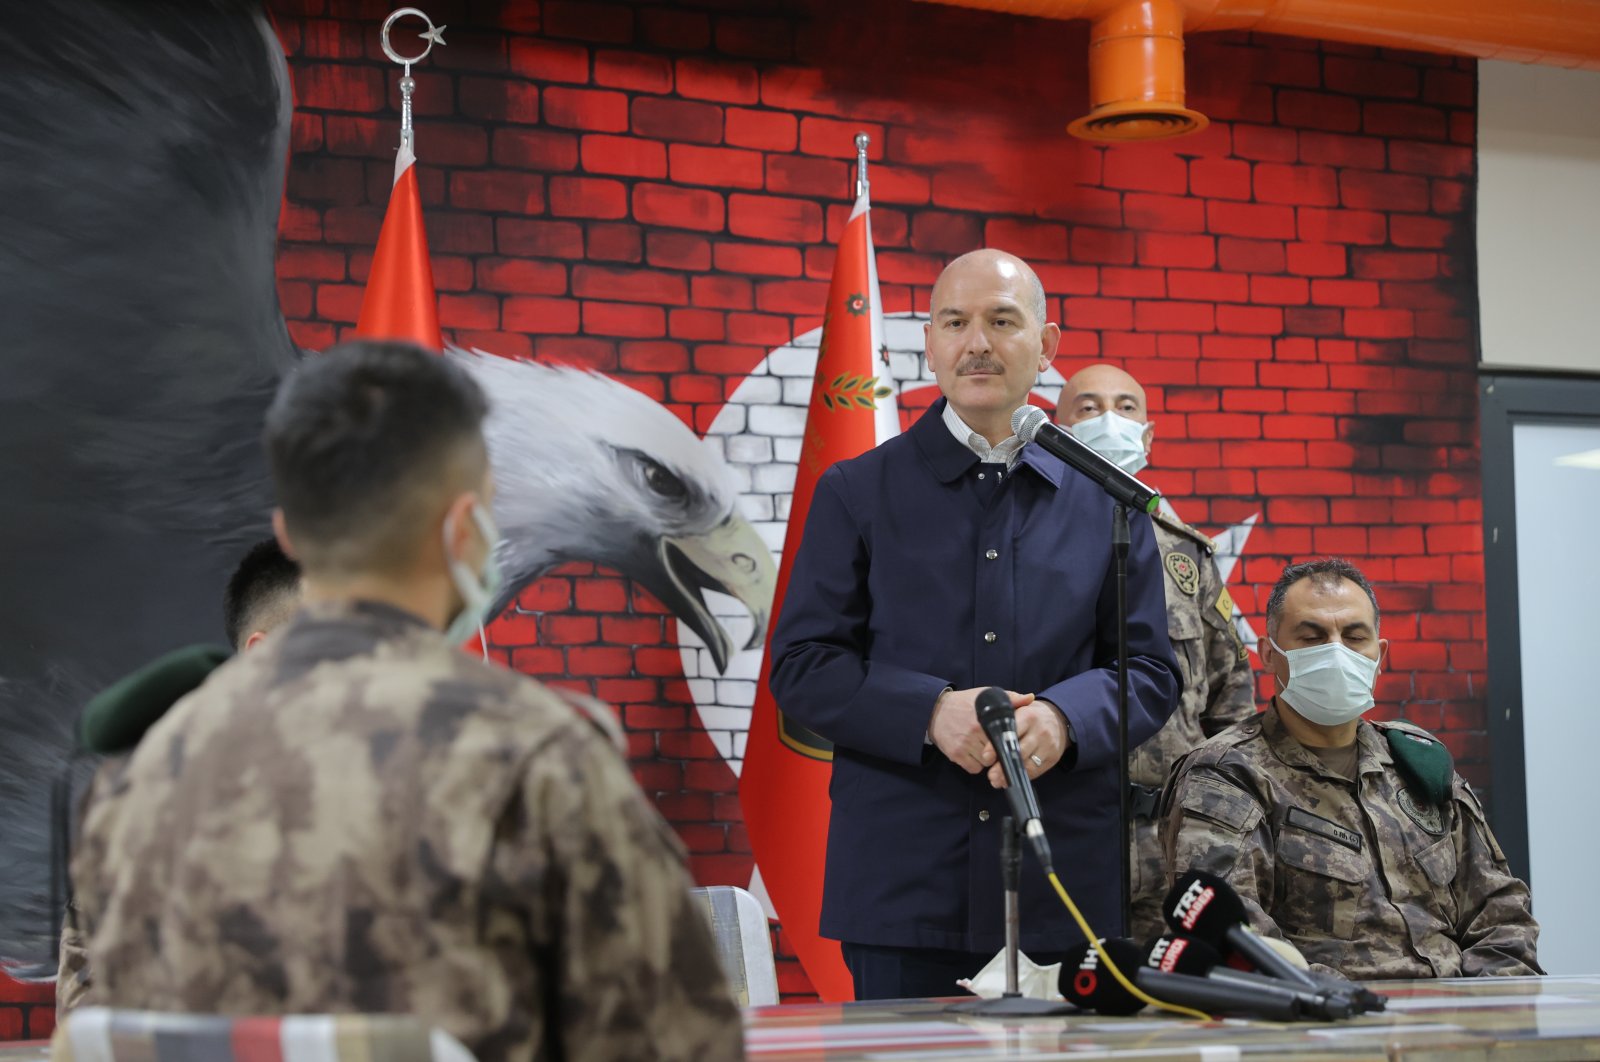 Interior Minister Süleyman Soylu is seen during his visit to Yüksekova Police Special Operations Center in Hakkari, Turkey, May 12, 2021. (AA Photo)